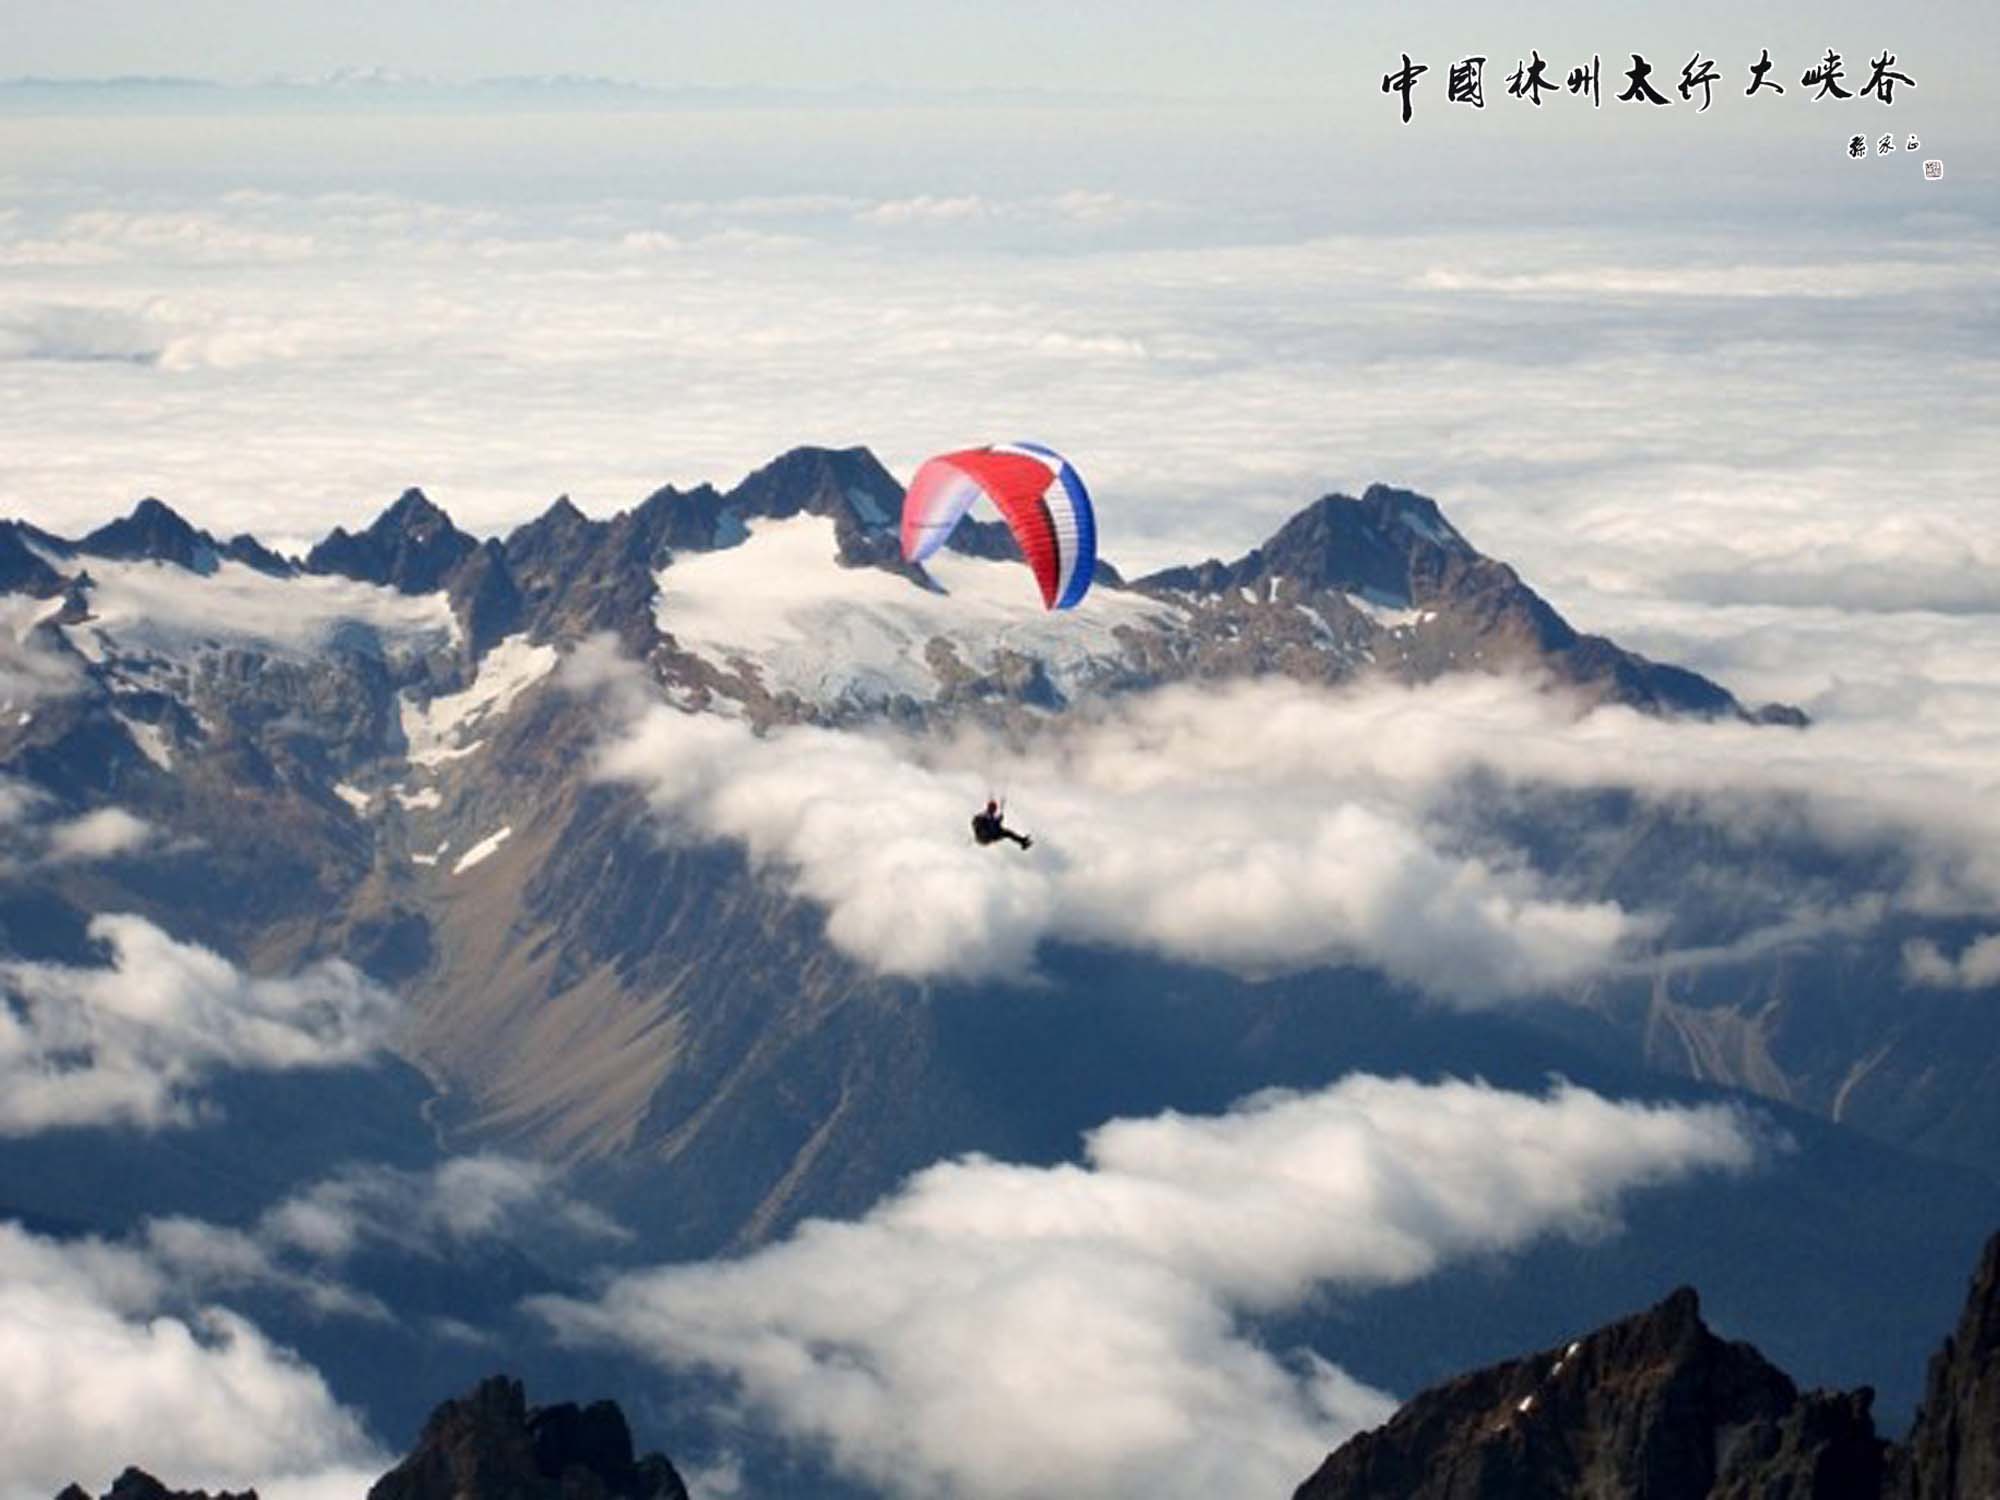 Travel of - automatic pilot the Linzhou Mountain in Shansi Grand Canyon tours the path